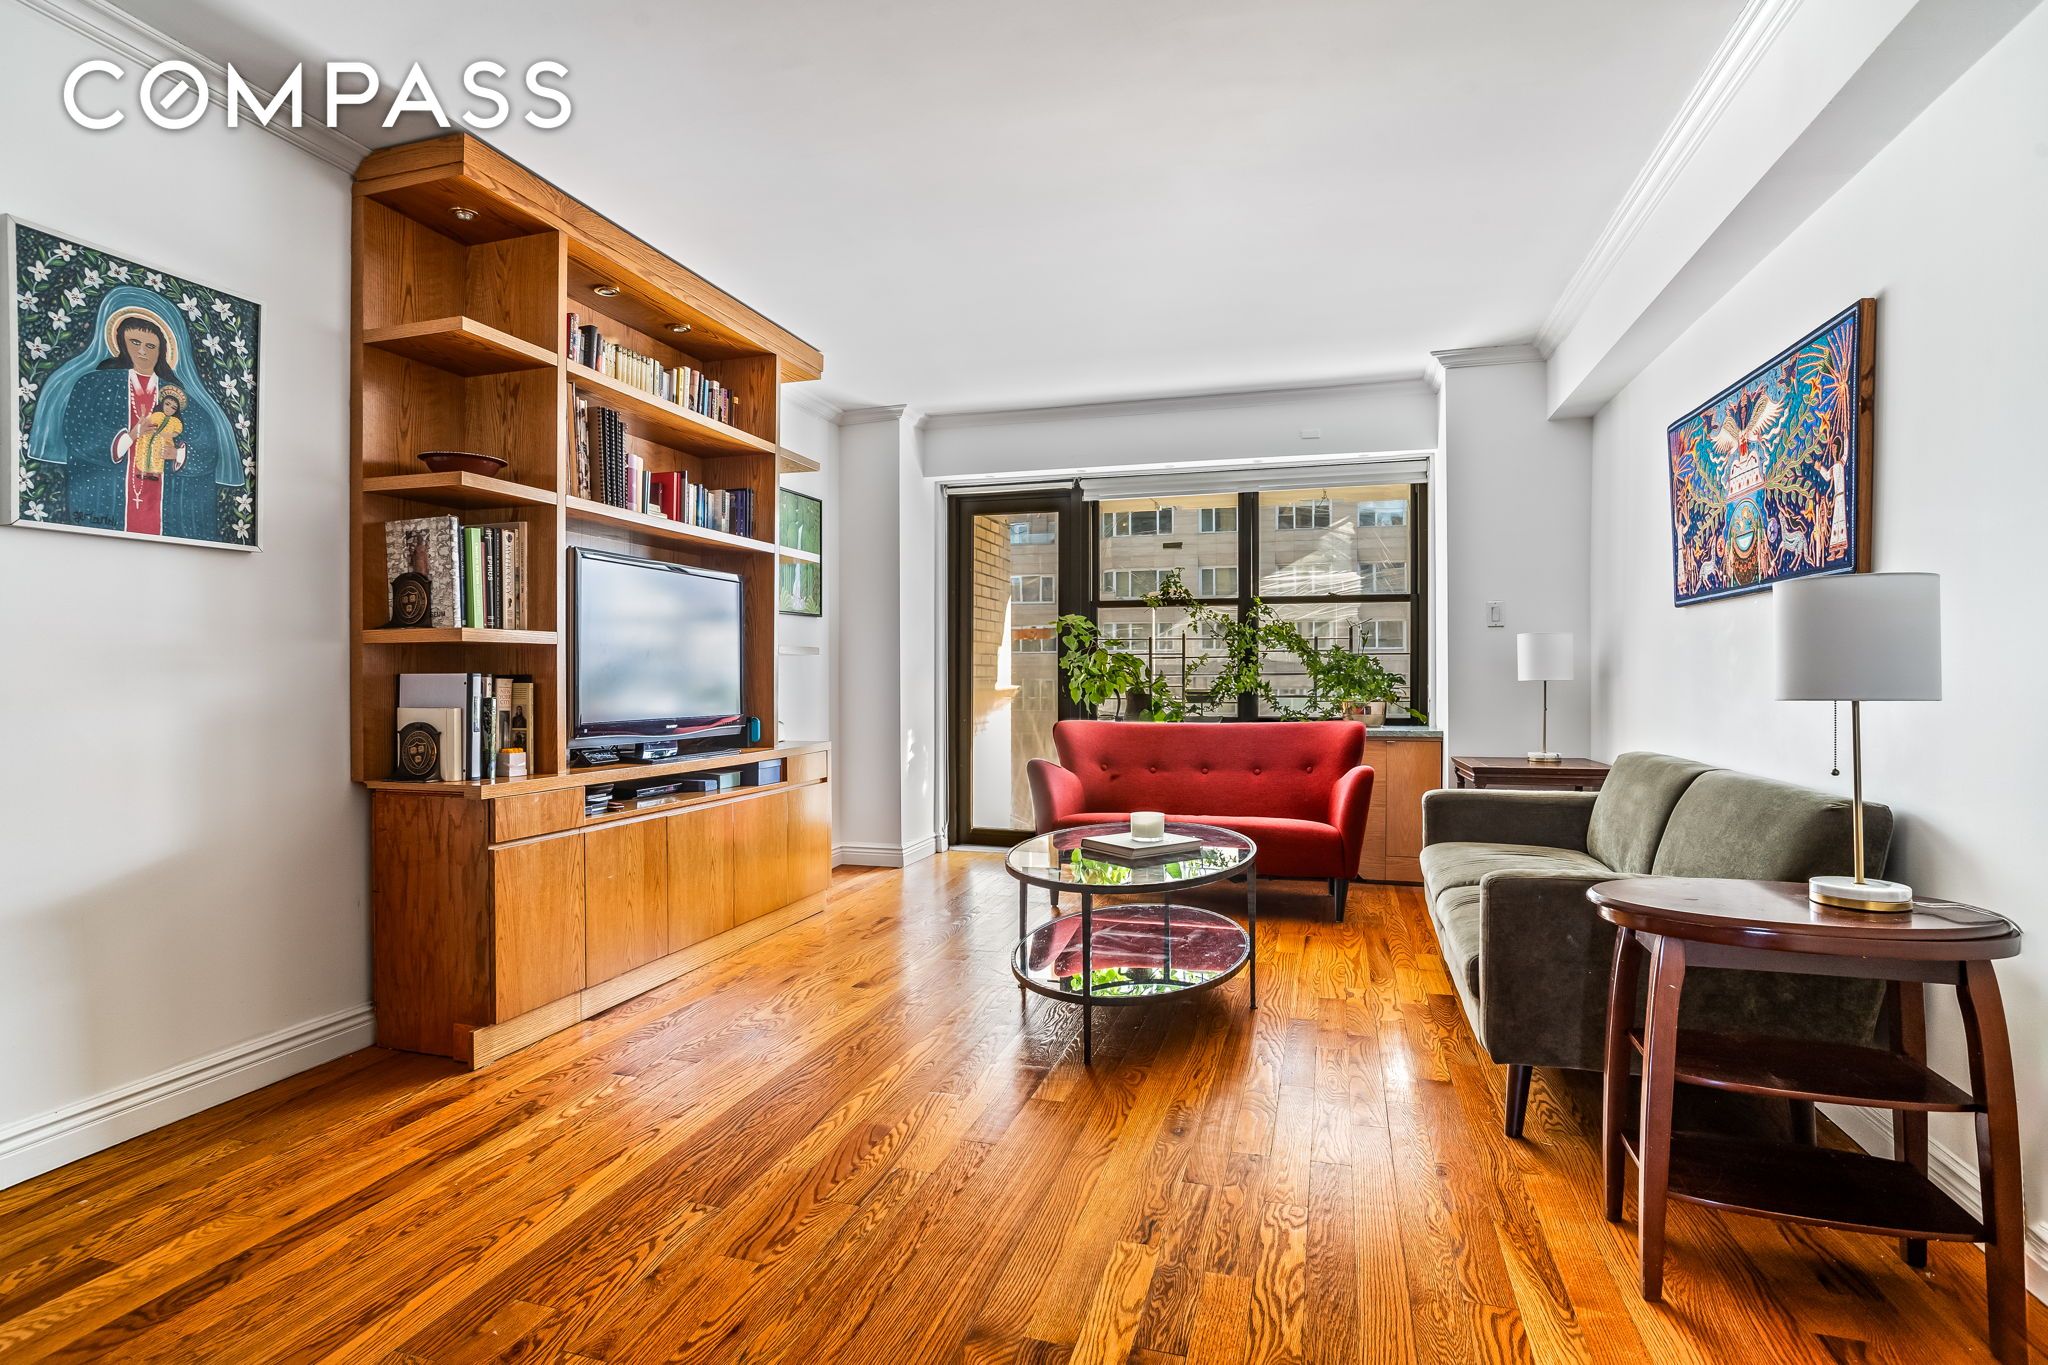 178 East 80th Street 14Ab, Upper East Side, Upper East Side, NYC - 3 Bedrooms  

7 Rooms - 